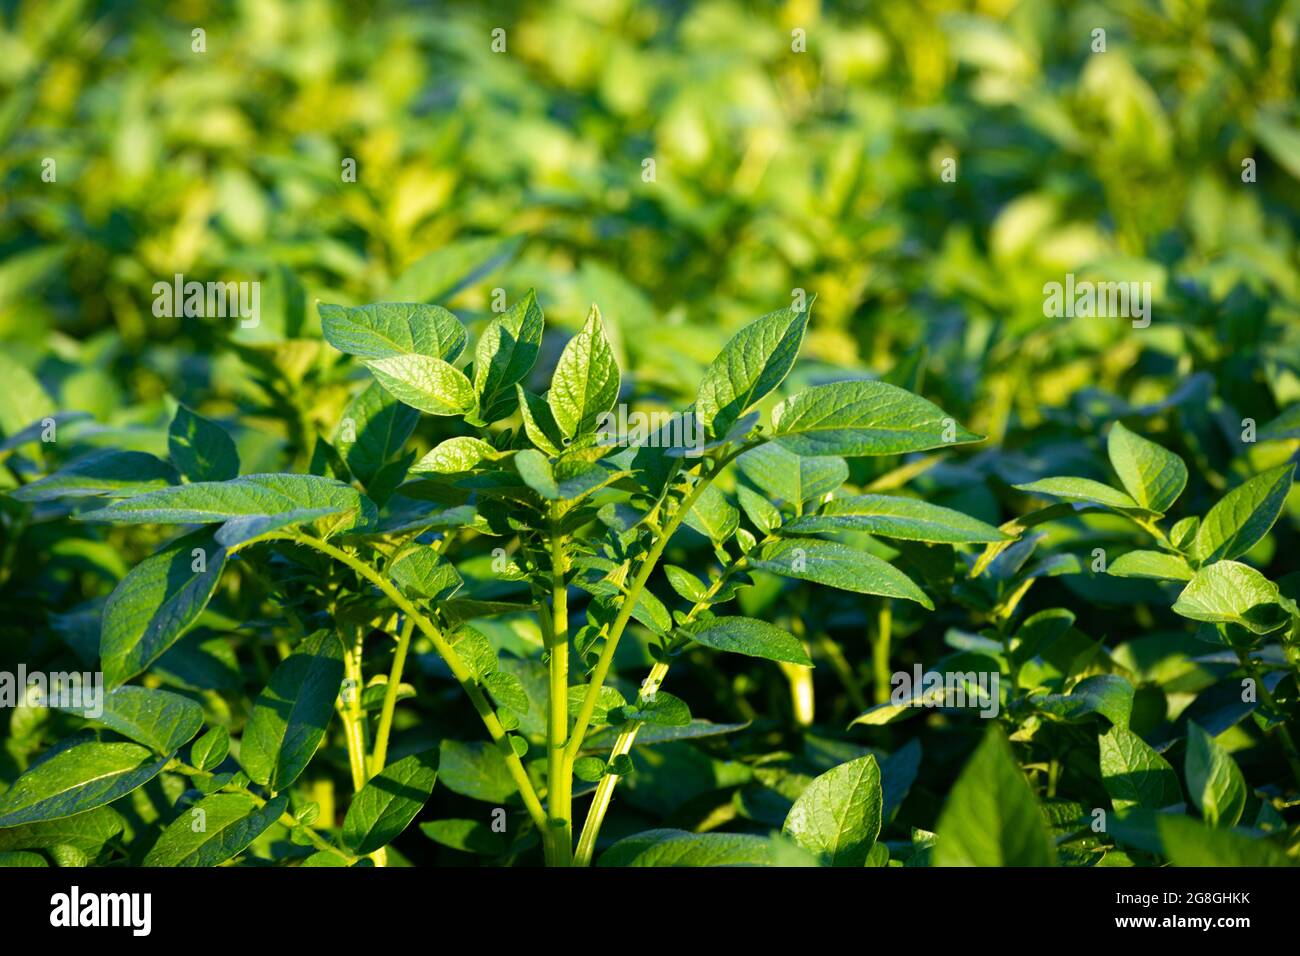 Young potato plant growing on the soil. Natural outdoor background. Stock Photo